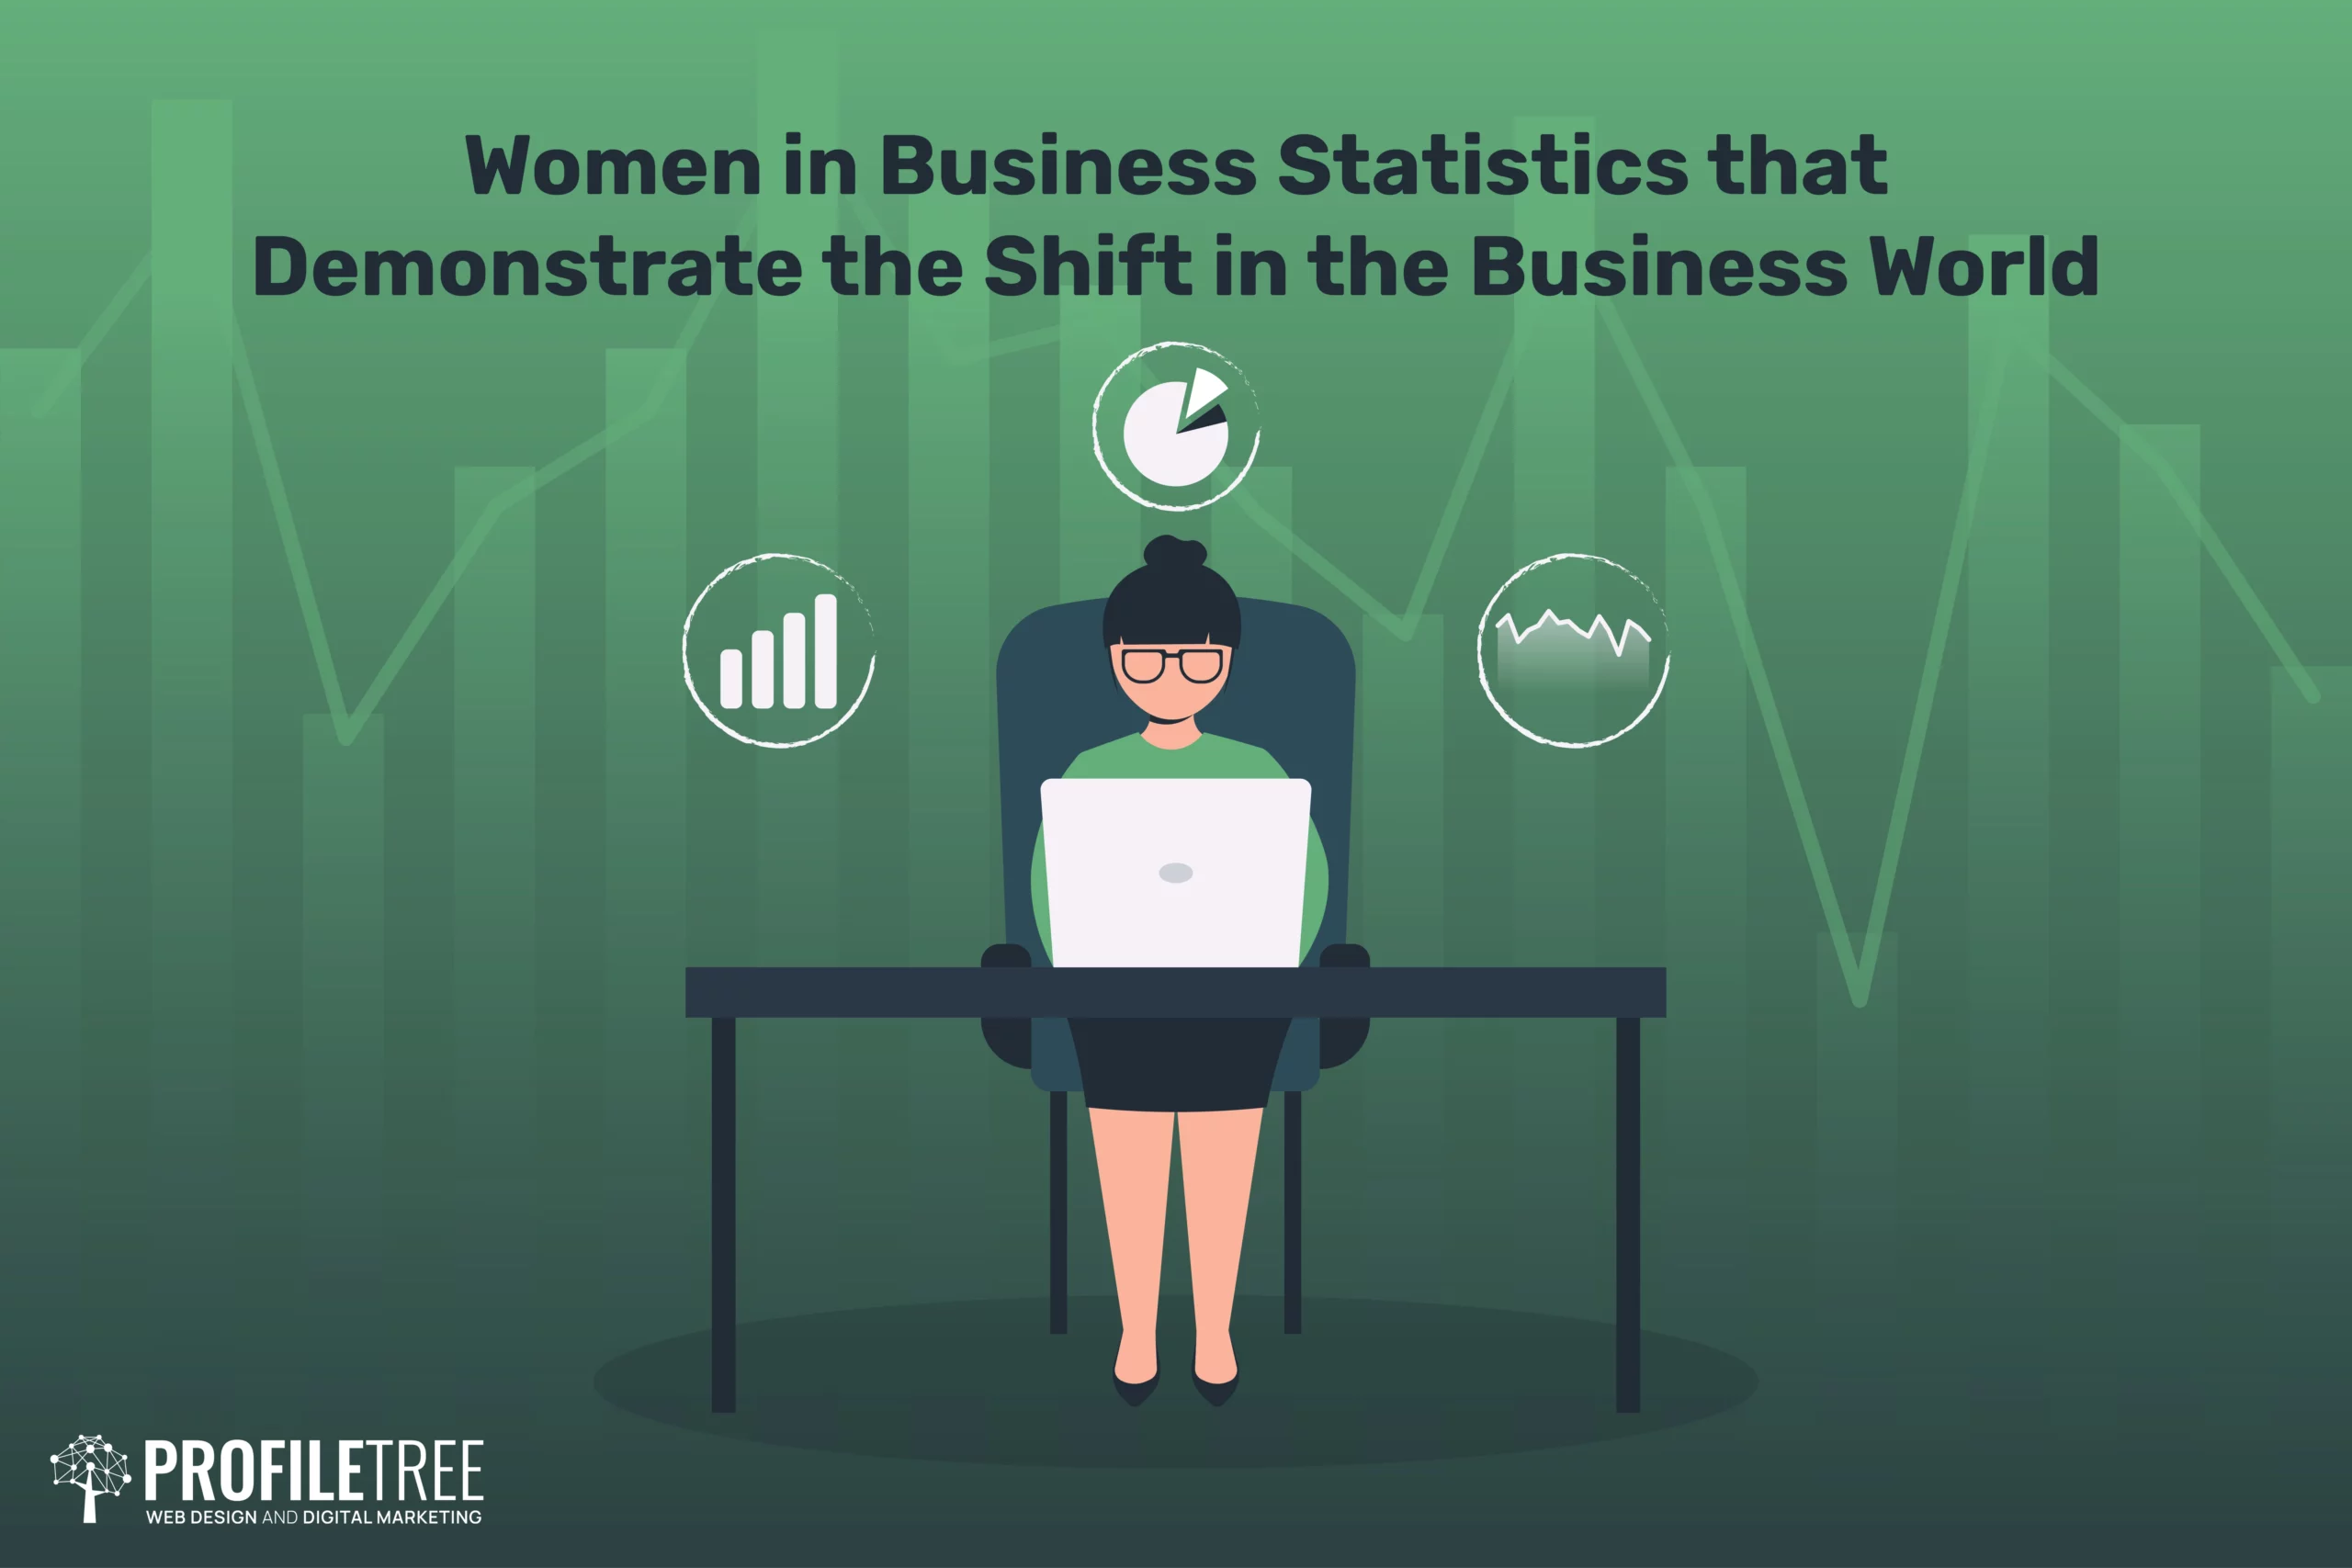 Women in Business Statistics that Demonstrate the Shift in the Business World